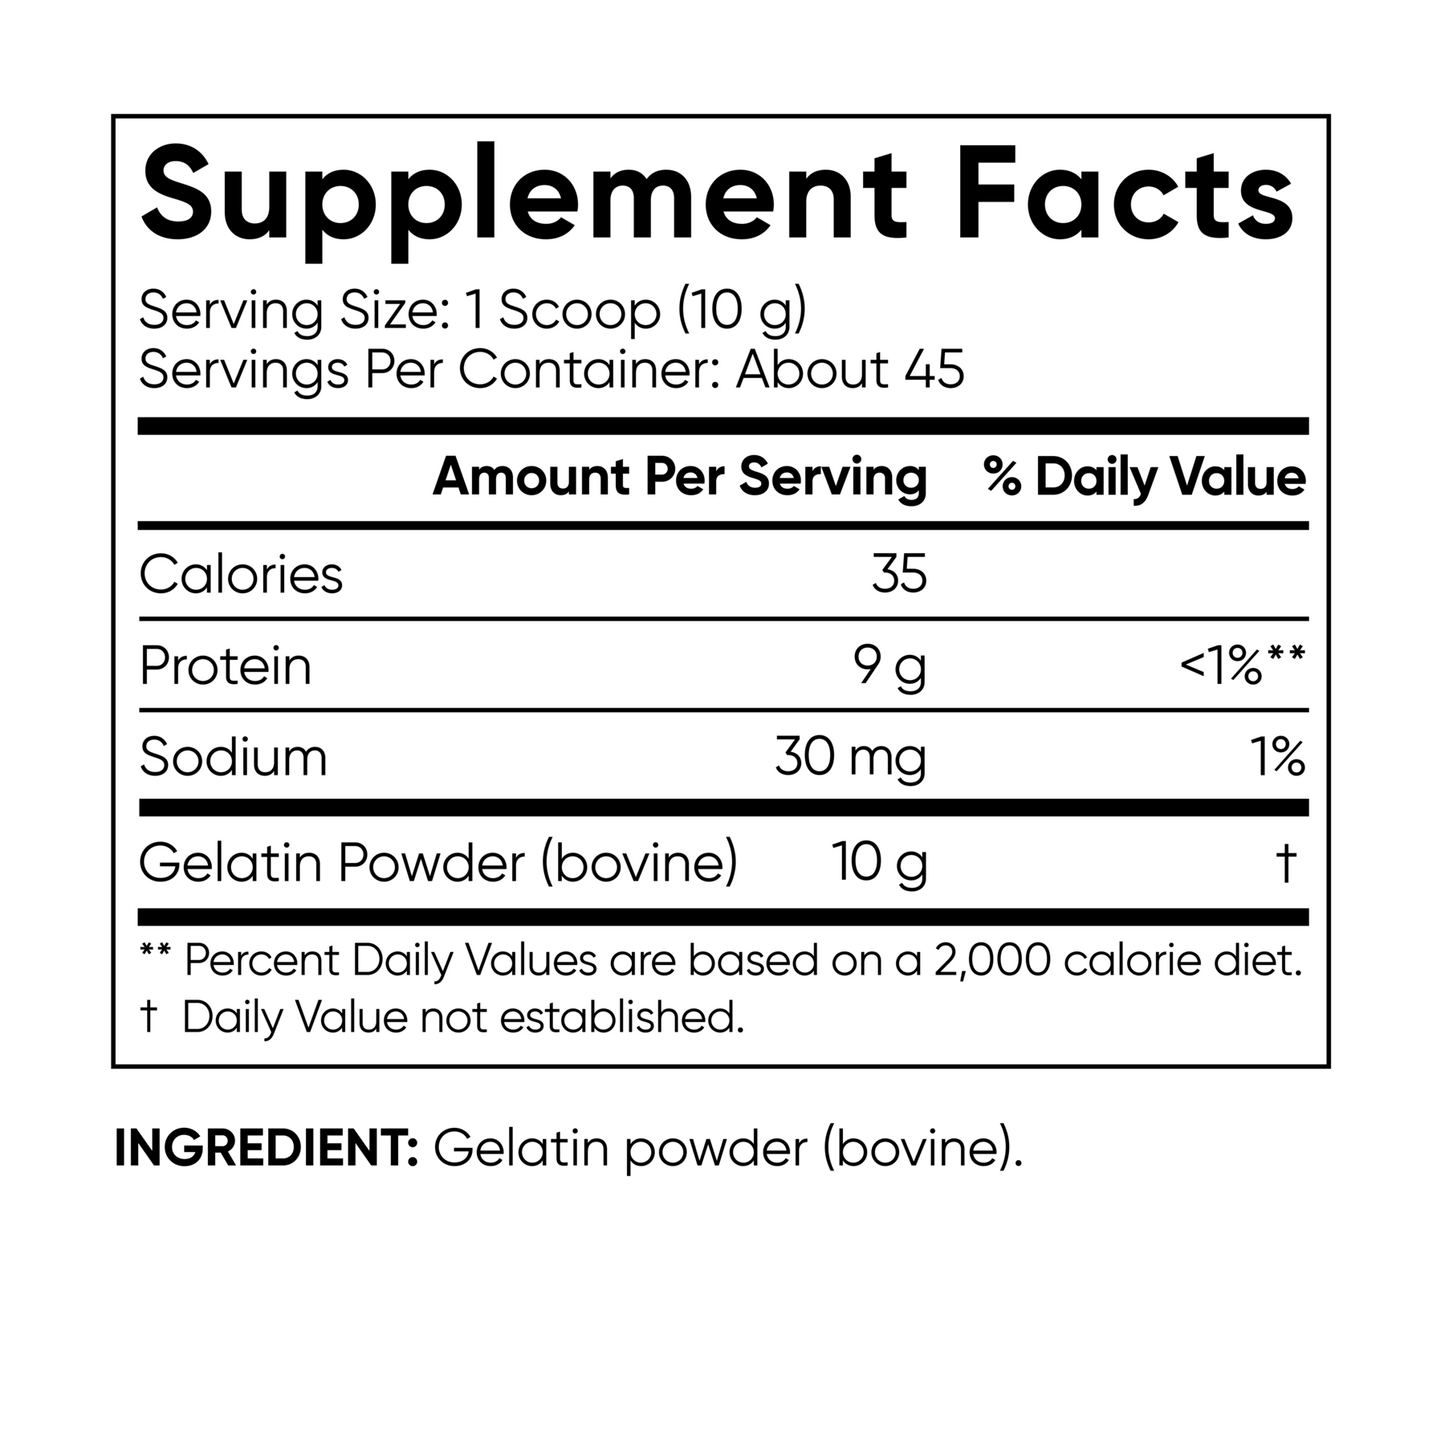 a nutrition label for Sports Research's Collagen Gelatin Powder.